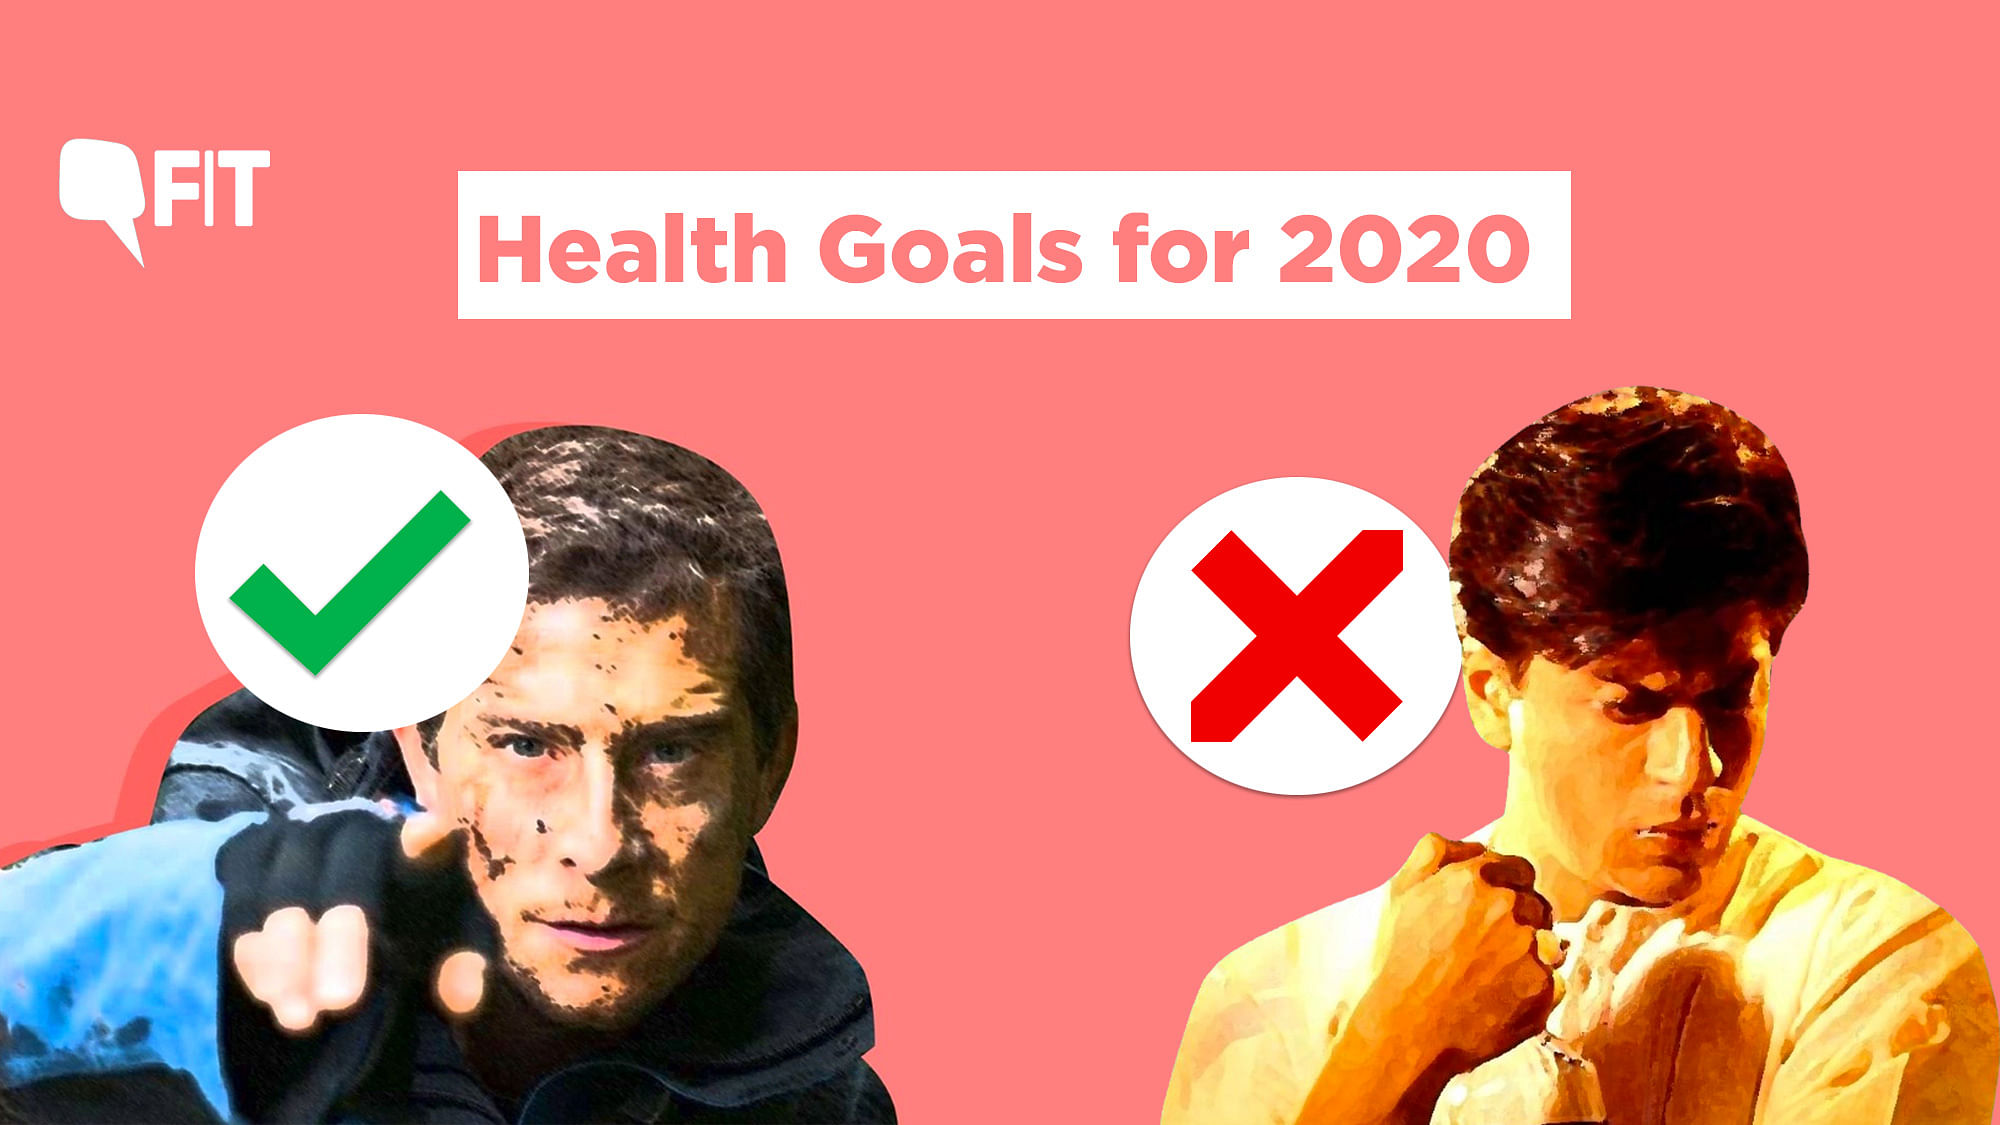 How about some honest health goals for 2020?